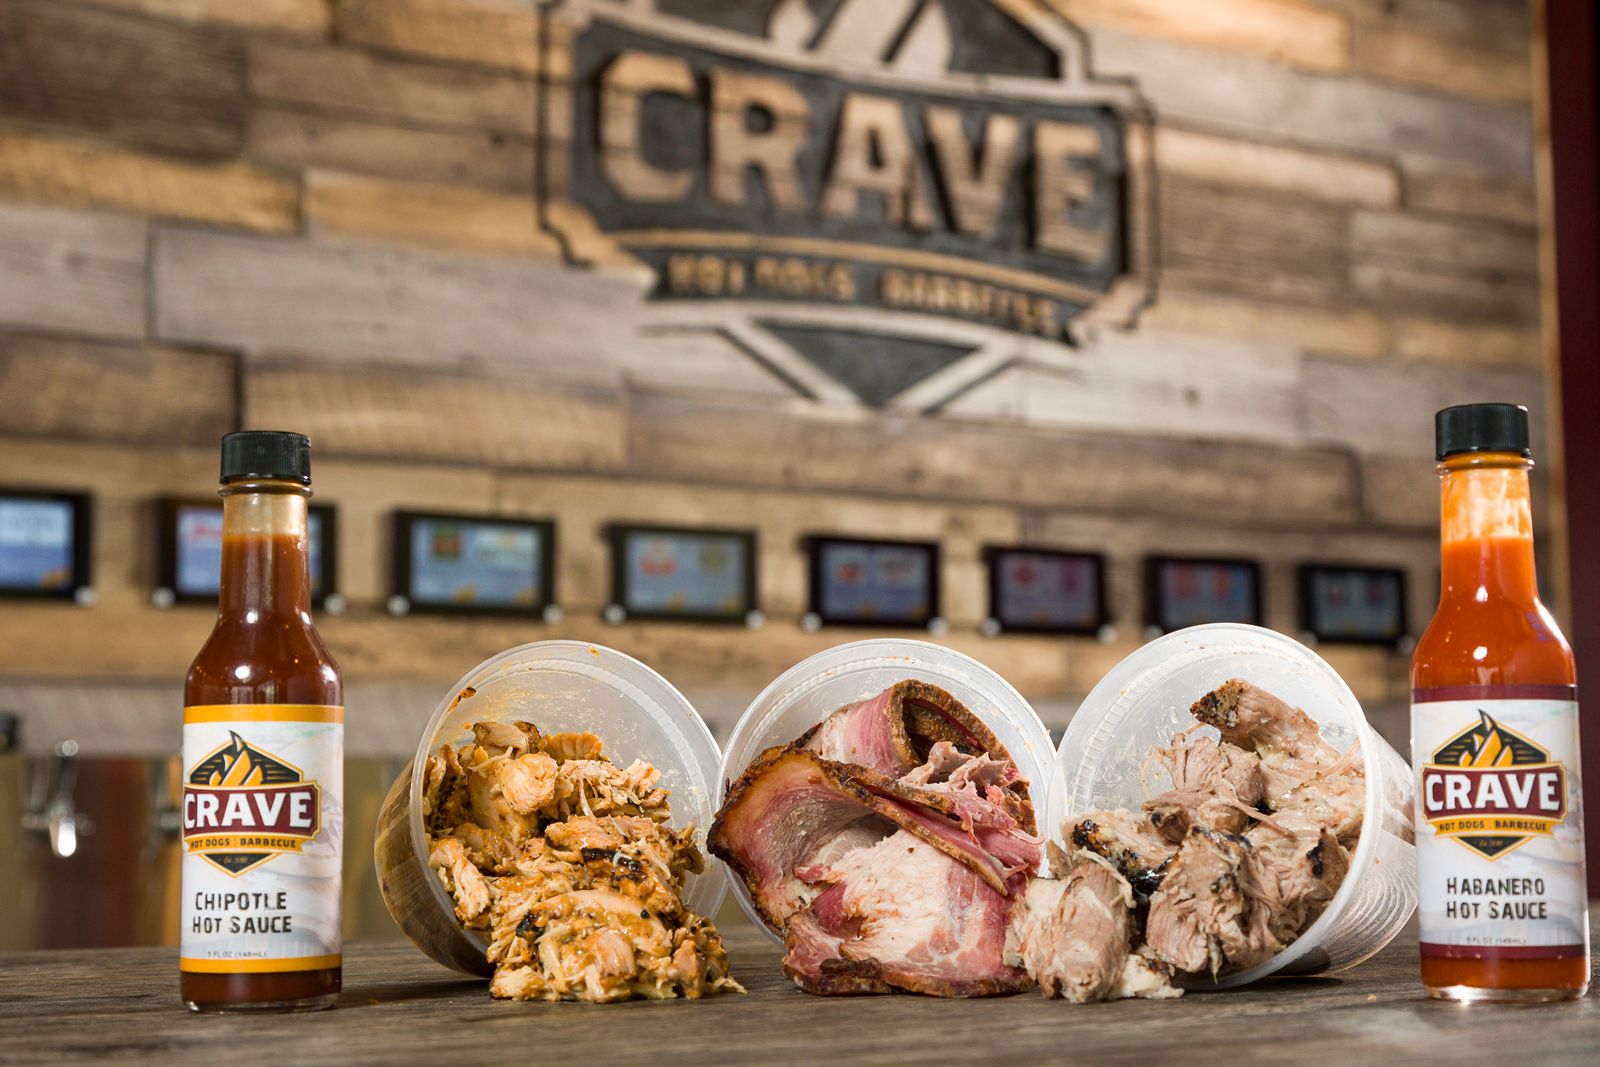 Crave Hot Dogs & BBQ Expands its Reach in Texas with Latest Location to be Built in Dallas